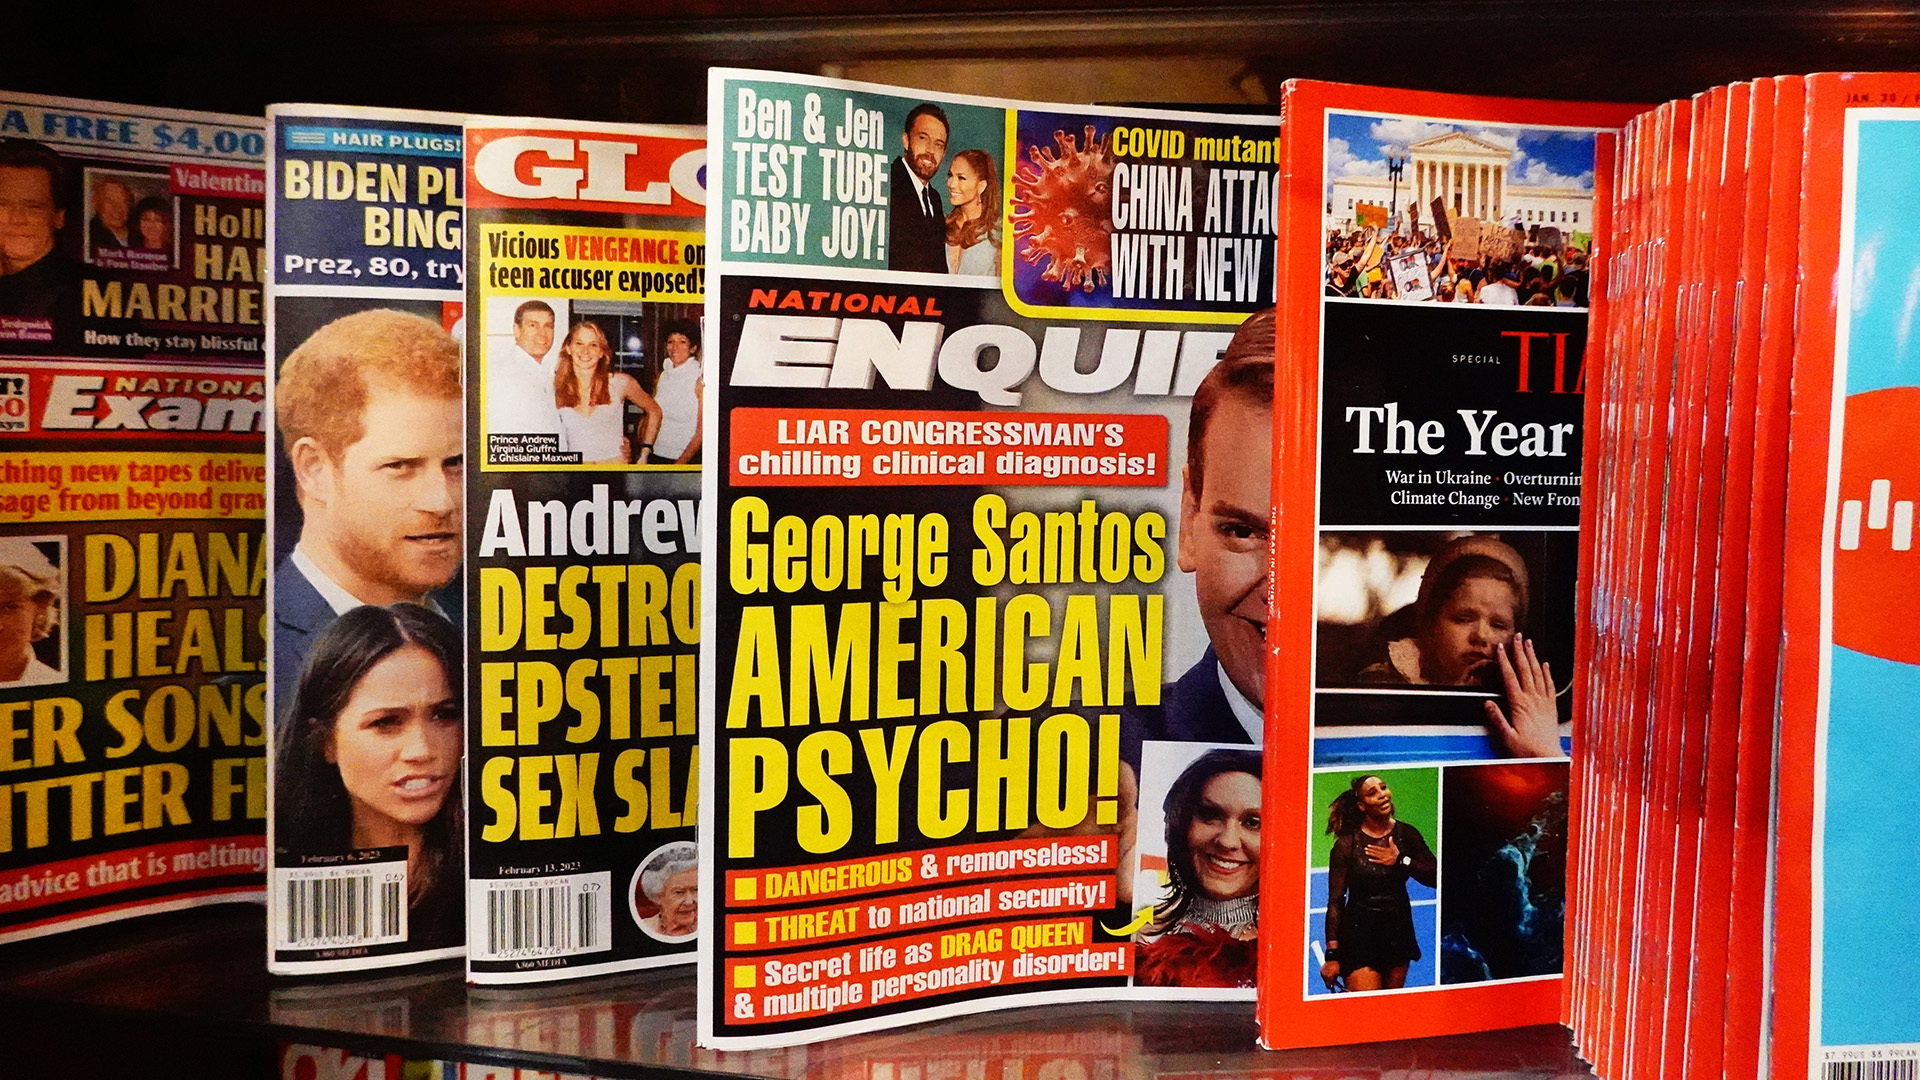 Former National Enquirer publisher's testimony exposes tabloid's efforts to assist Trump's campaign for the presidency.